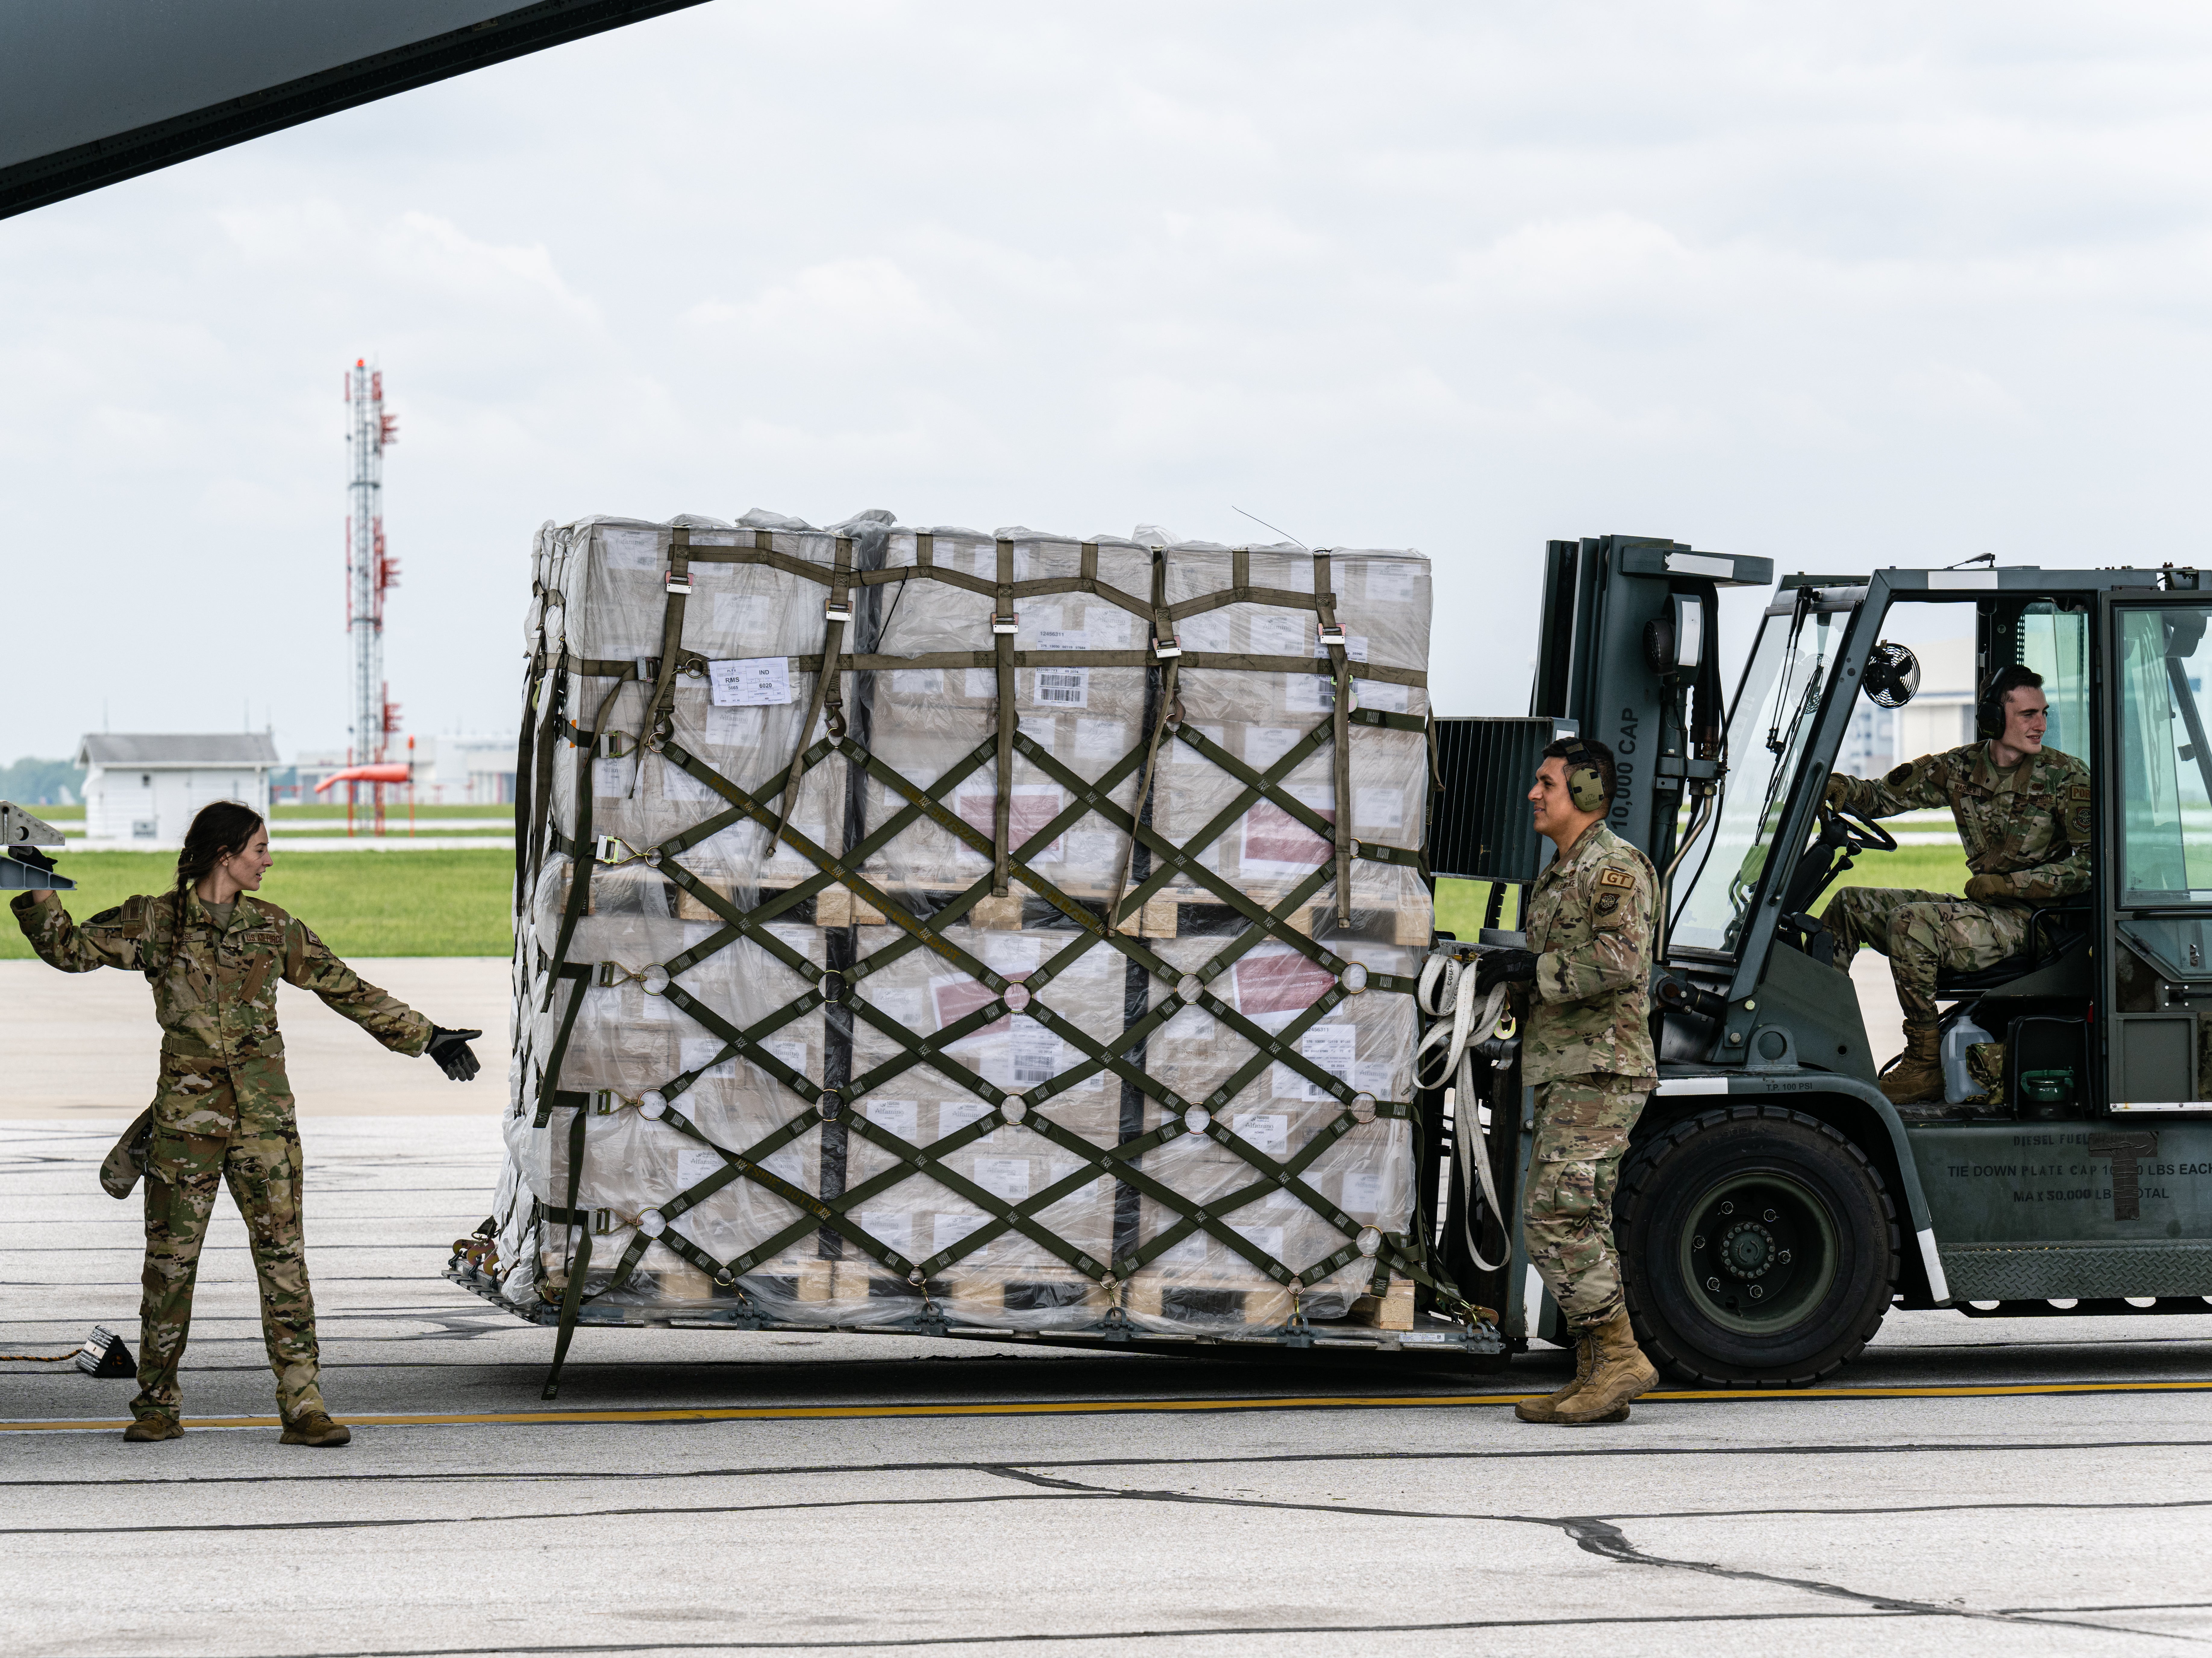 Airmen unload pallets from the cargo bay of a U.S. Air Force C-17 carrying 78,000 lbs of Nestle Health Science Alfamino Infant and Alfamino Junior formula from Europe at Indianapolis Airport on May 22, 2022 in Indianapolis, Indiana